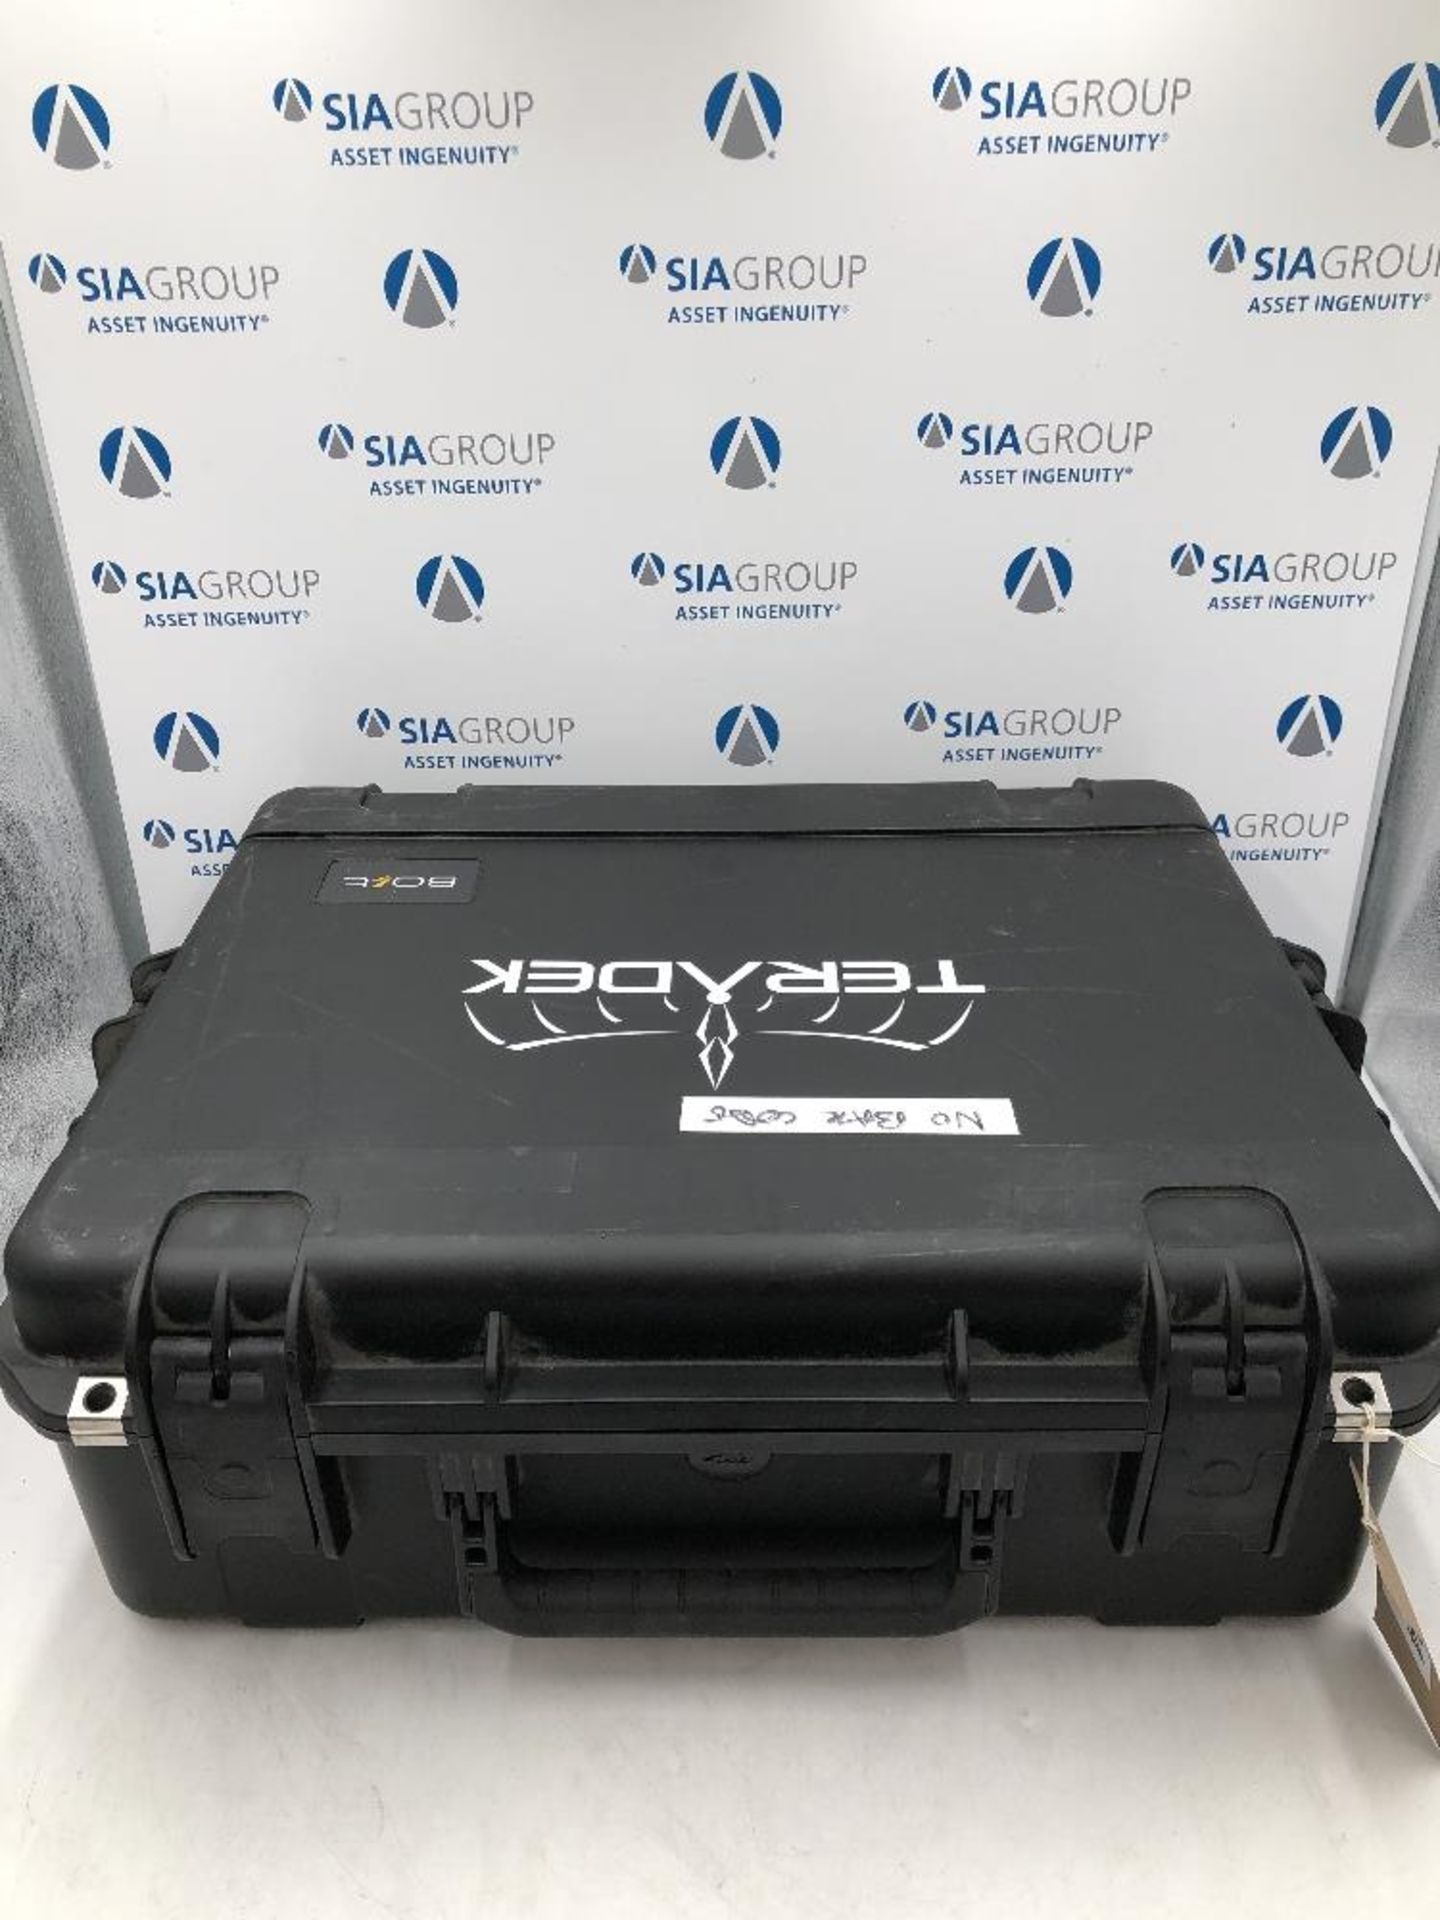 Teradek Bolt 3000 Array Panel/Antenna With Array Mount And Carry Case - Image 5 of 5